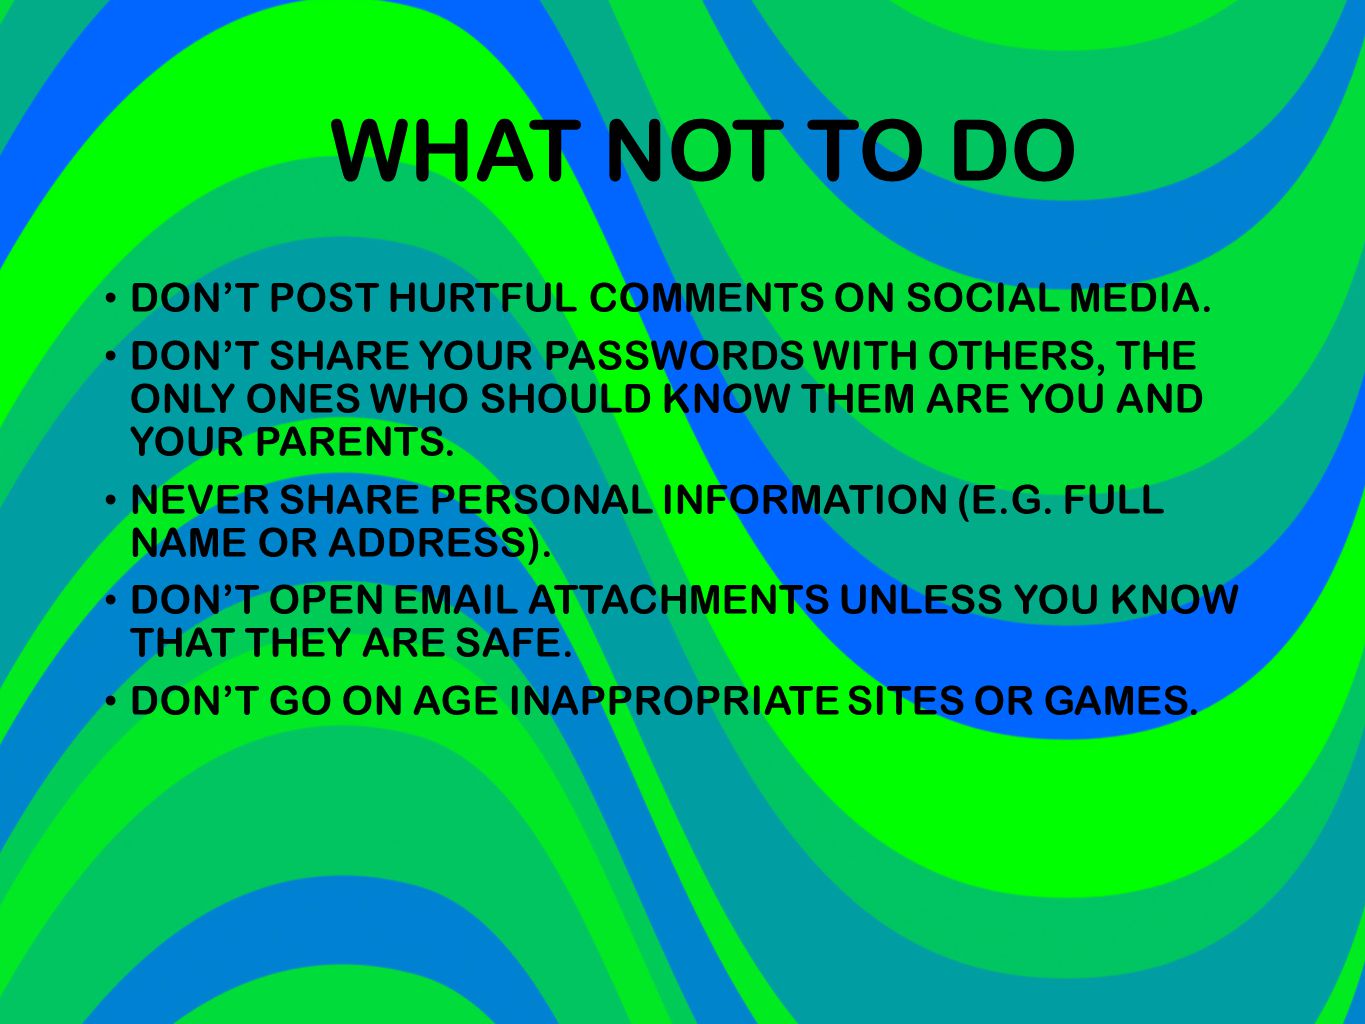 WHAT NOT TO DO DON’T POST HURTFUL COMMENTS ON SOCIAL MEDIA.